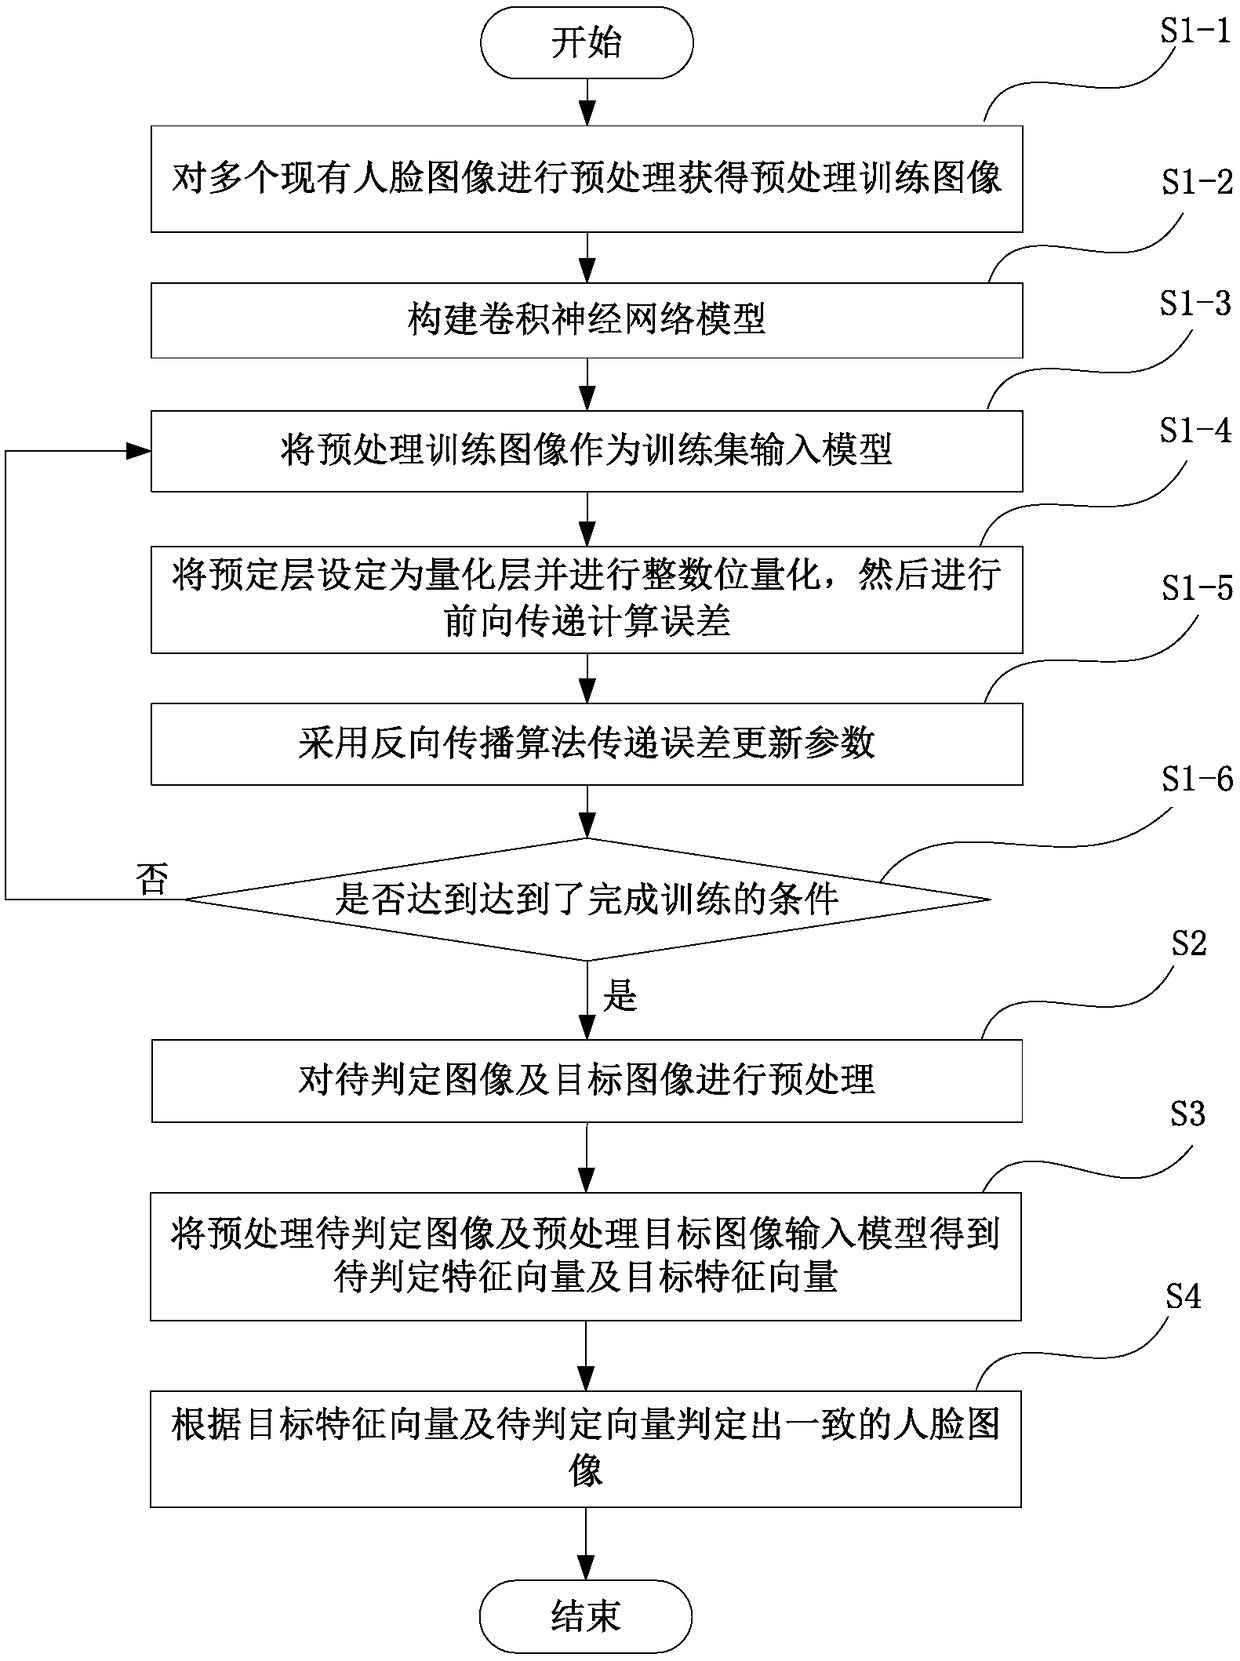 Human face recognition method and device based on residual-quantized convolutional neural network